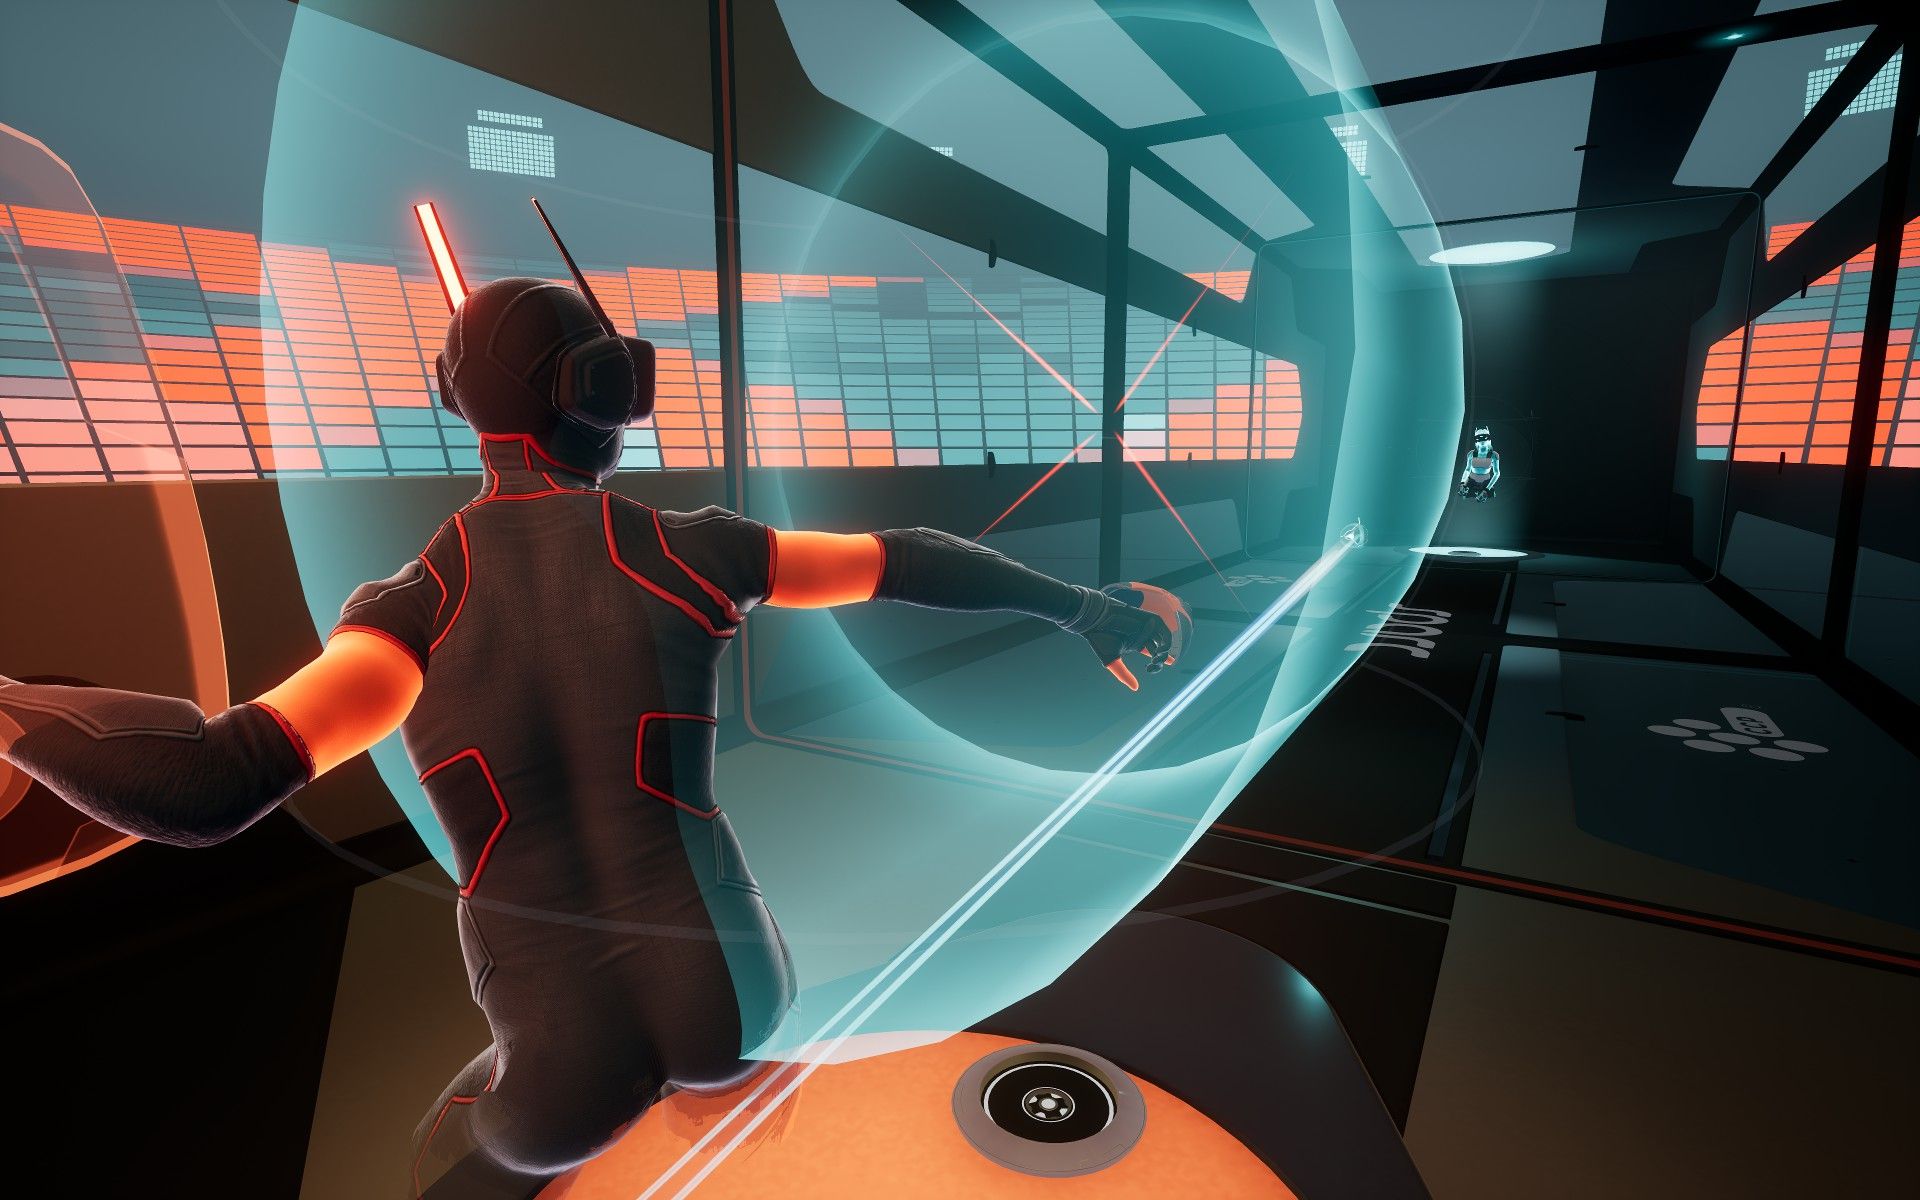 PlayStation VR Sports Game Sparc's Release Date Announced